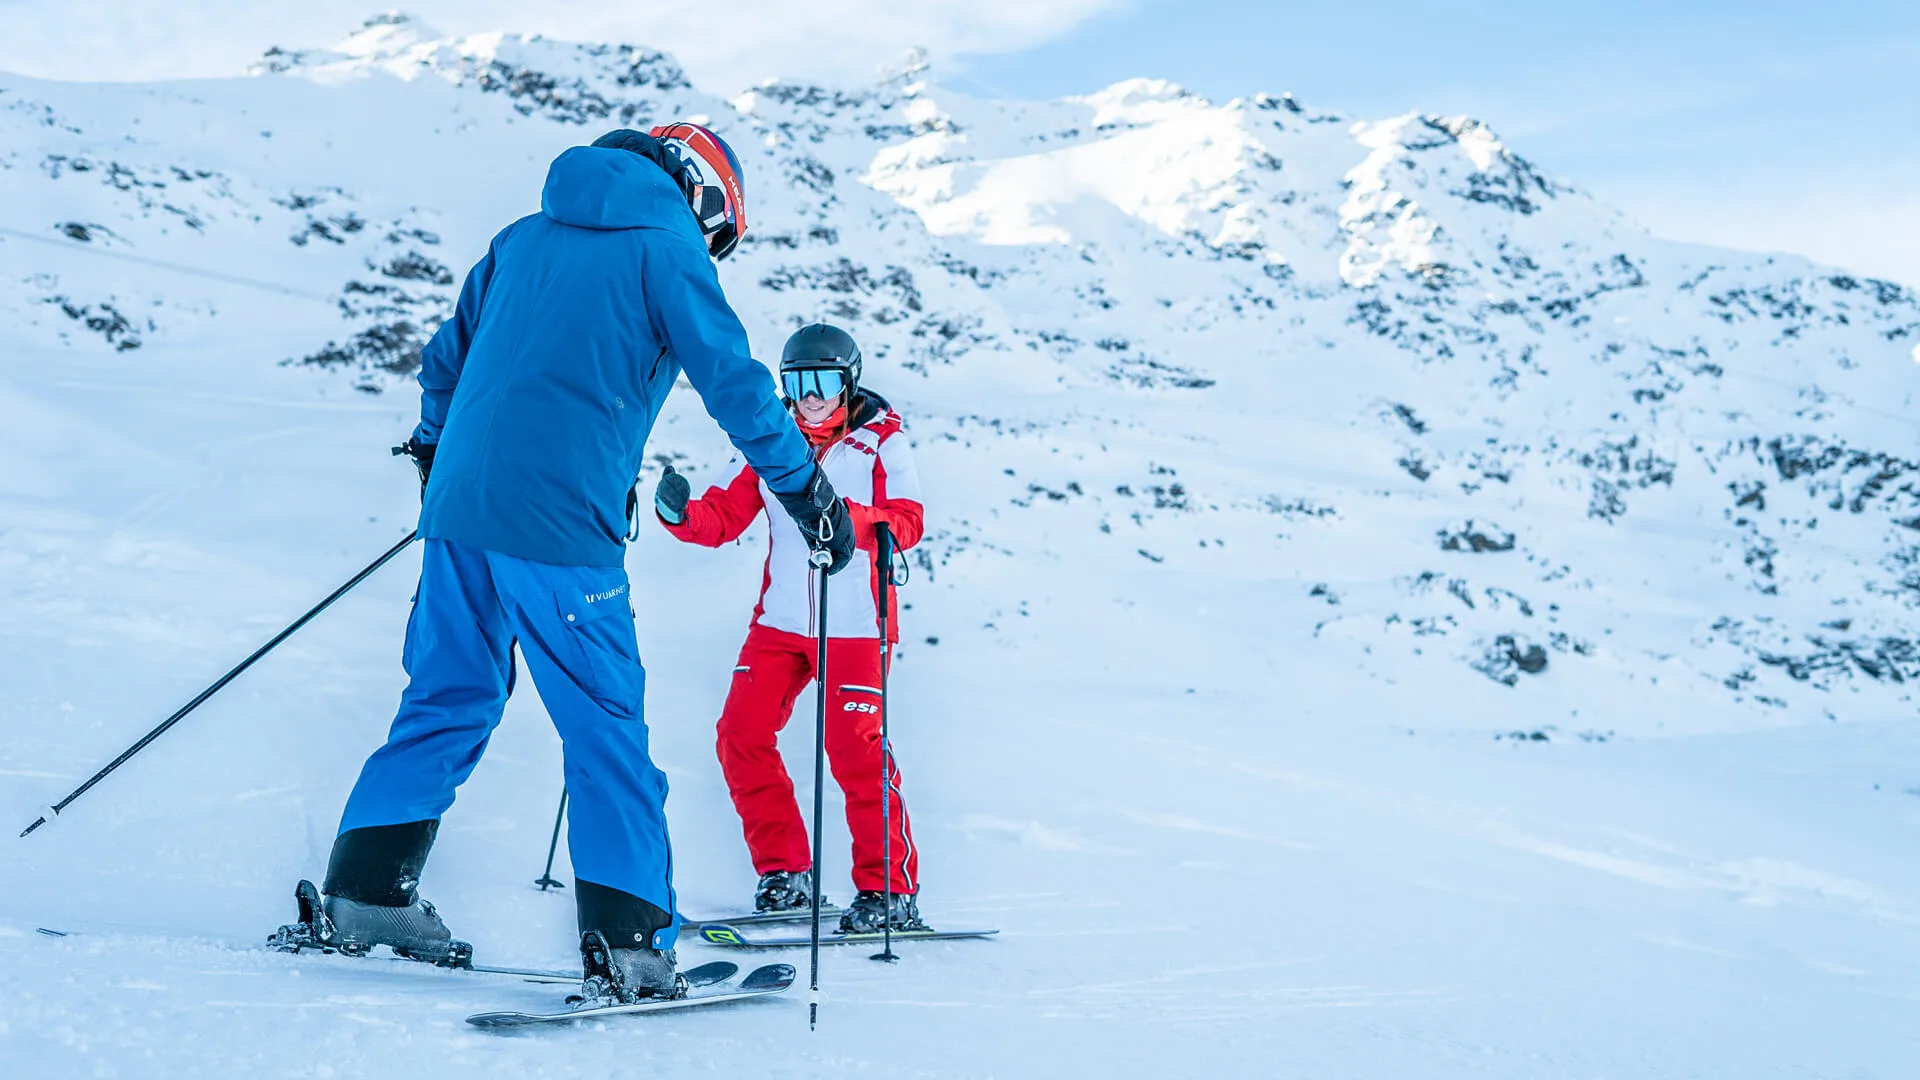 Area for Beginners at Val Thorens : Learn and Progress with Confidence